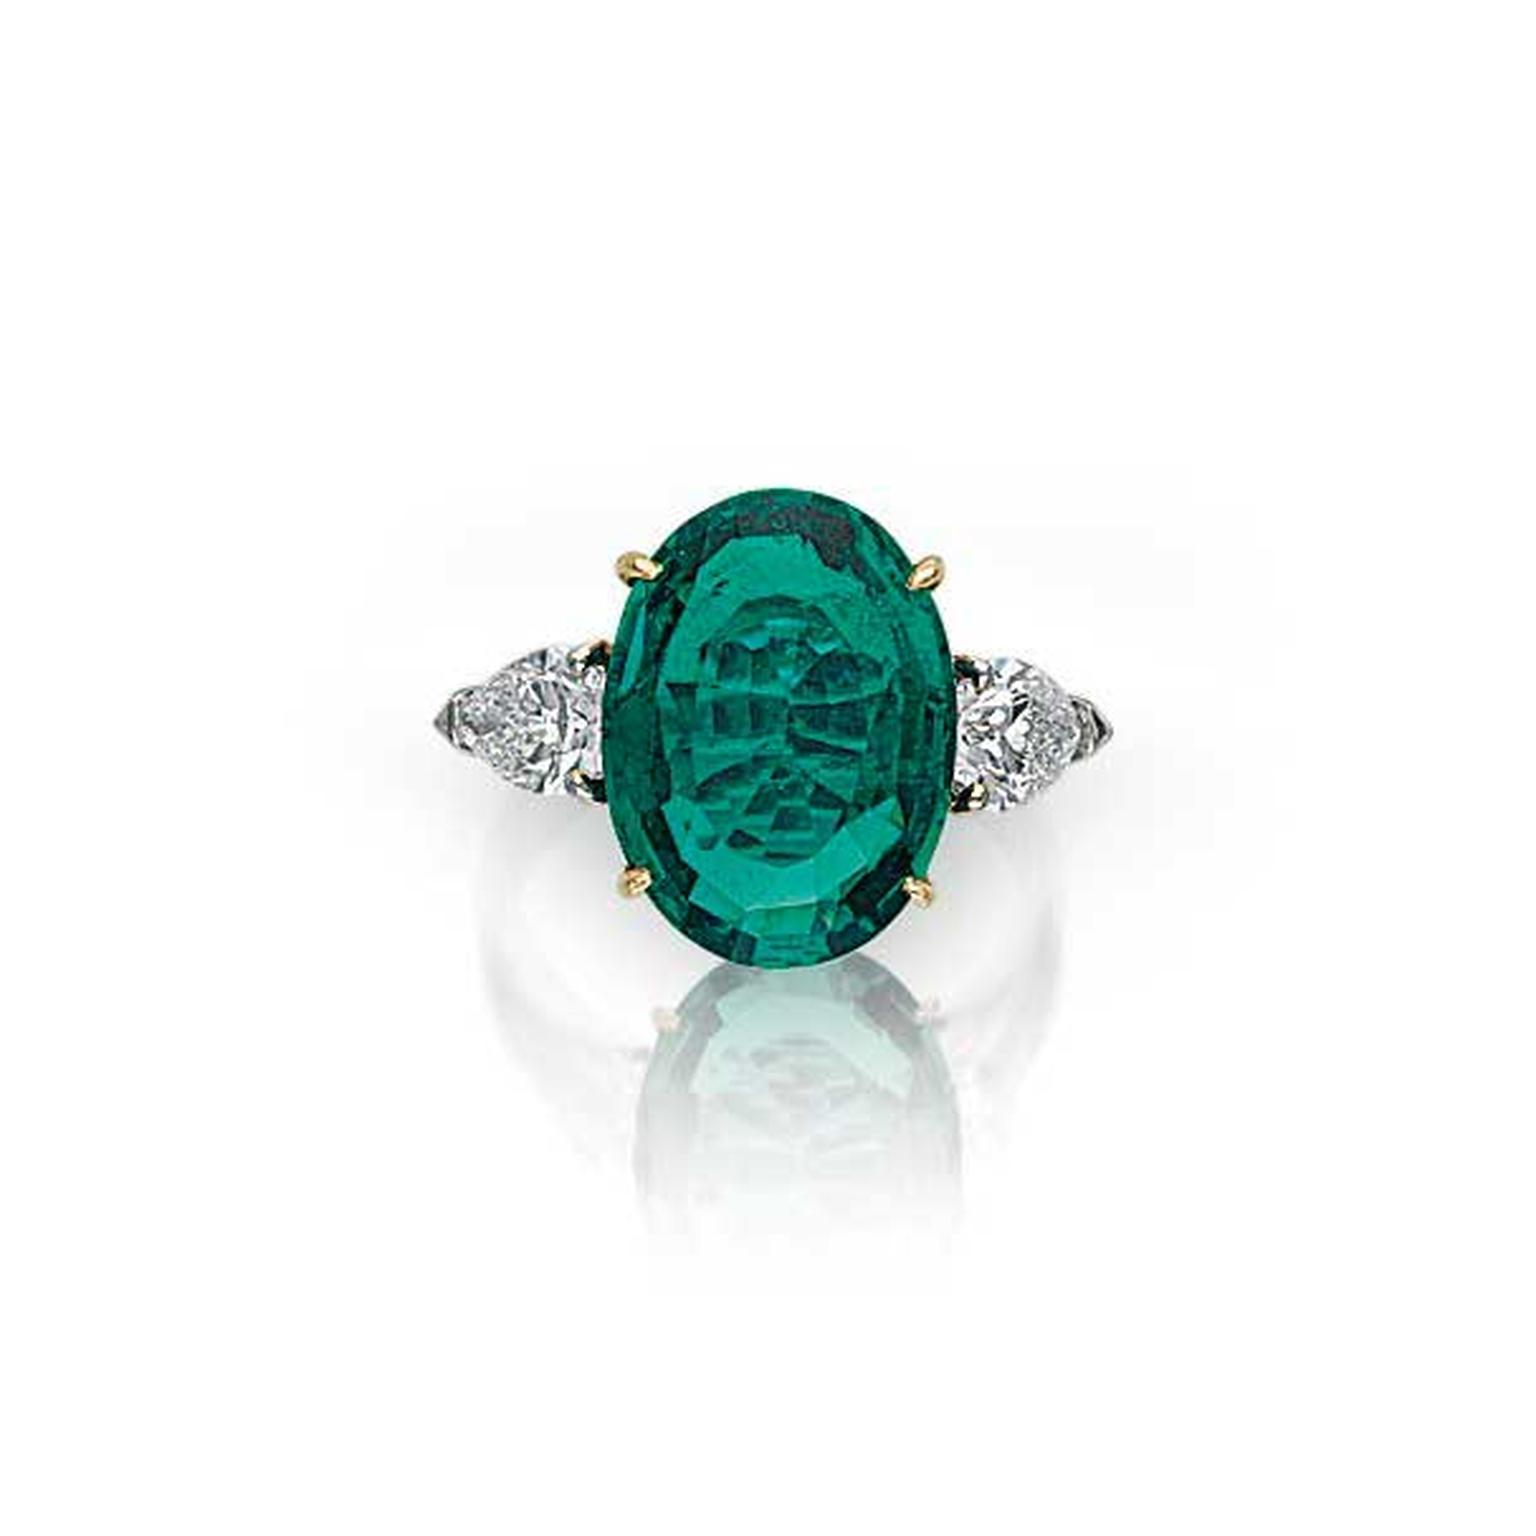 Oval-cut Colombian emerald ring